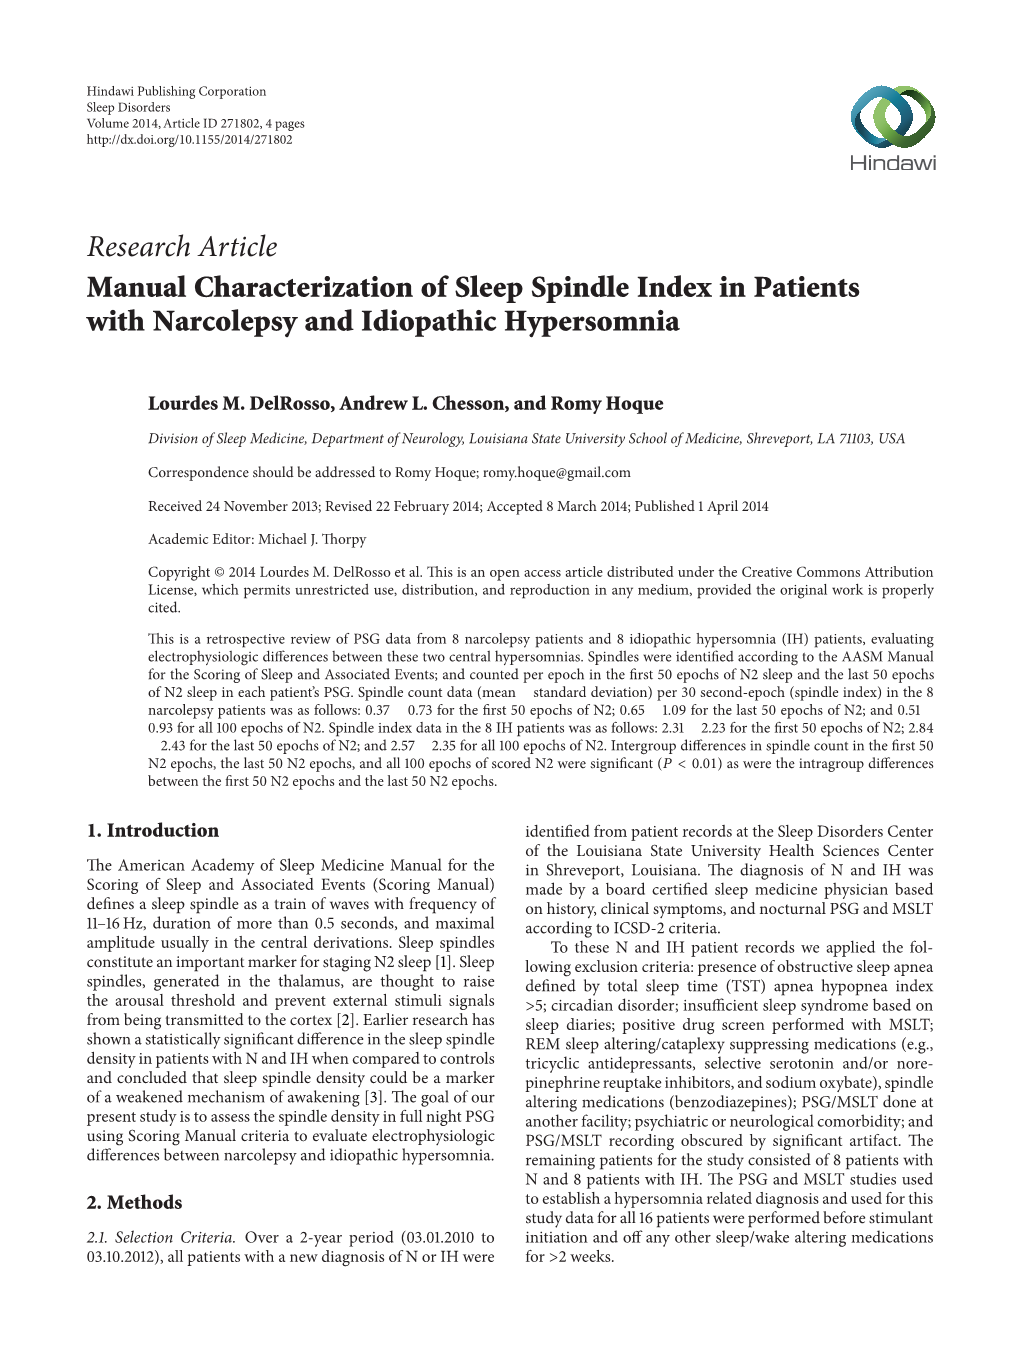 Manual Characterization of Sleep Spindle Index in Patients with Narcolepsy and Idiopathic Hypersomnia